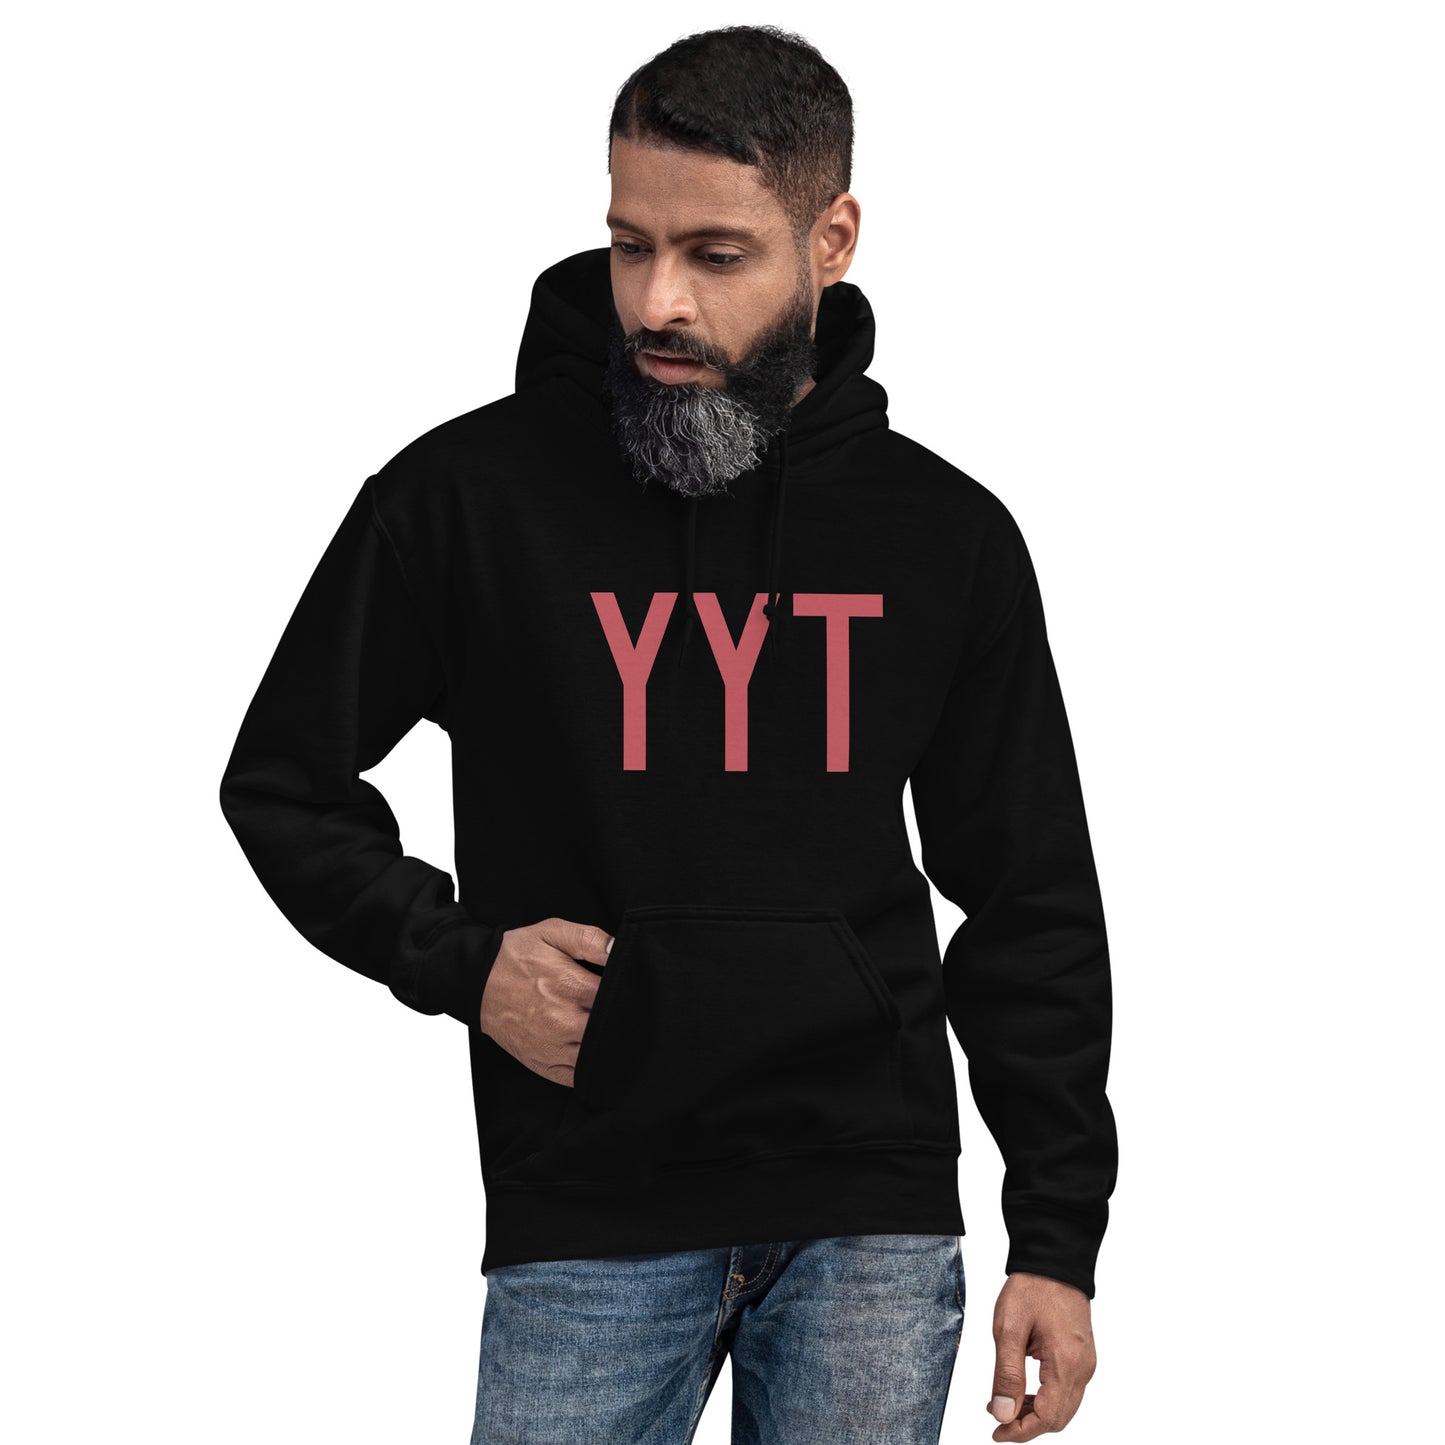 Aviation Enthusiast Hoodie - Deep Pink Graphic • YYT St. John's • YHM Designs - Image 05